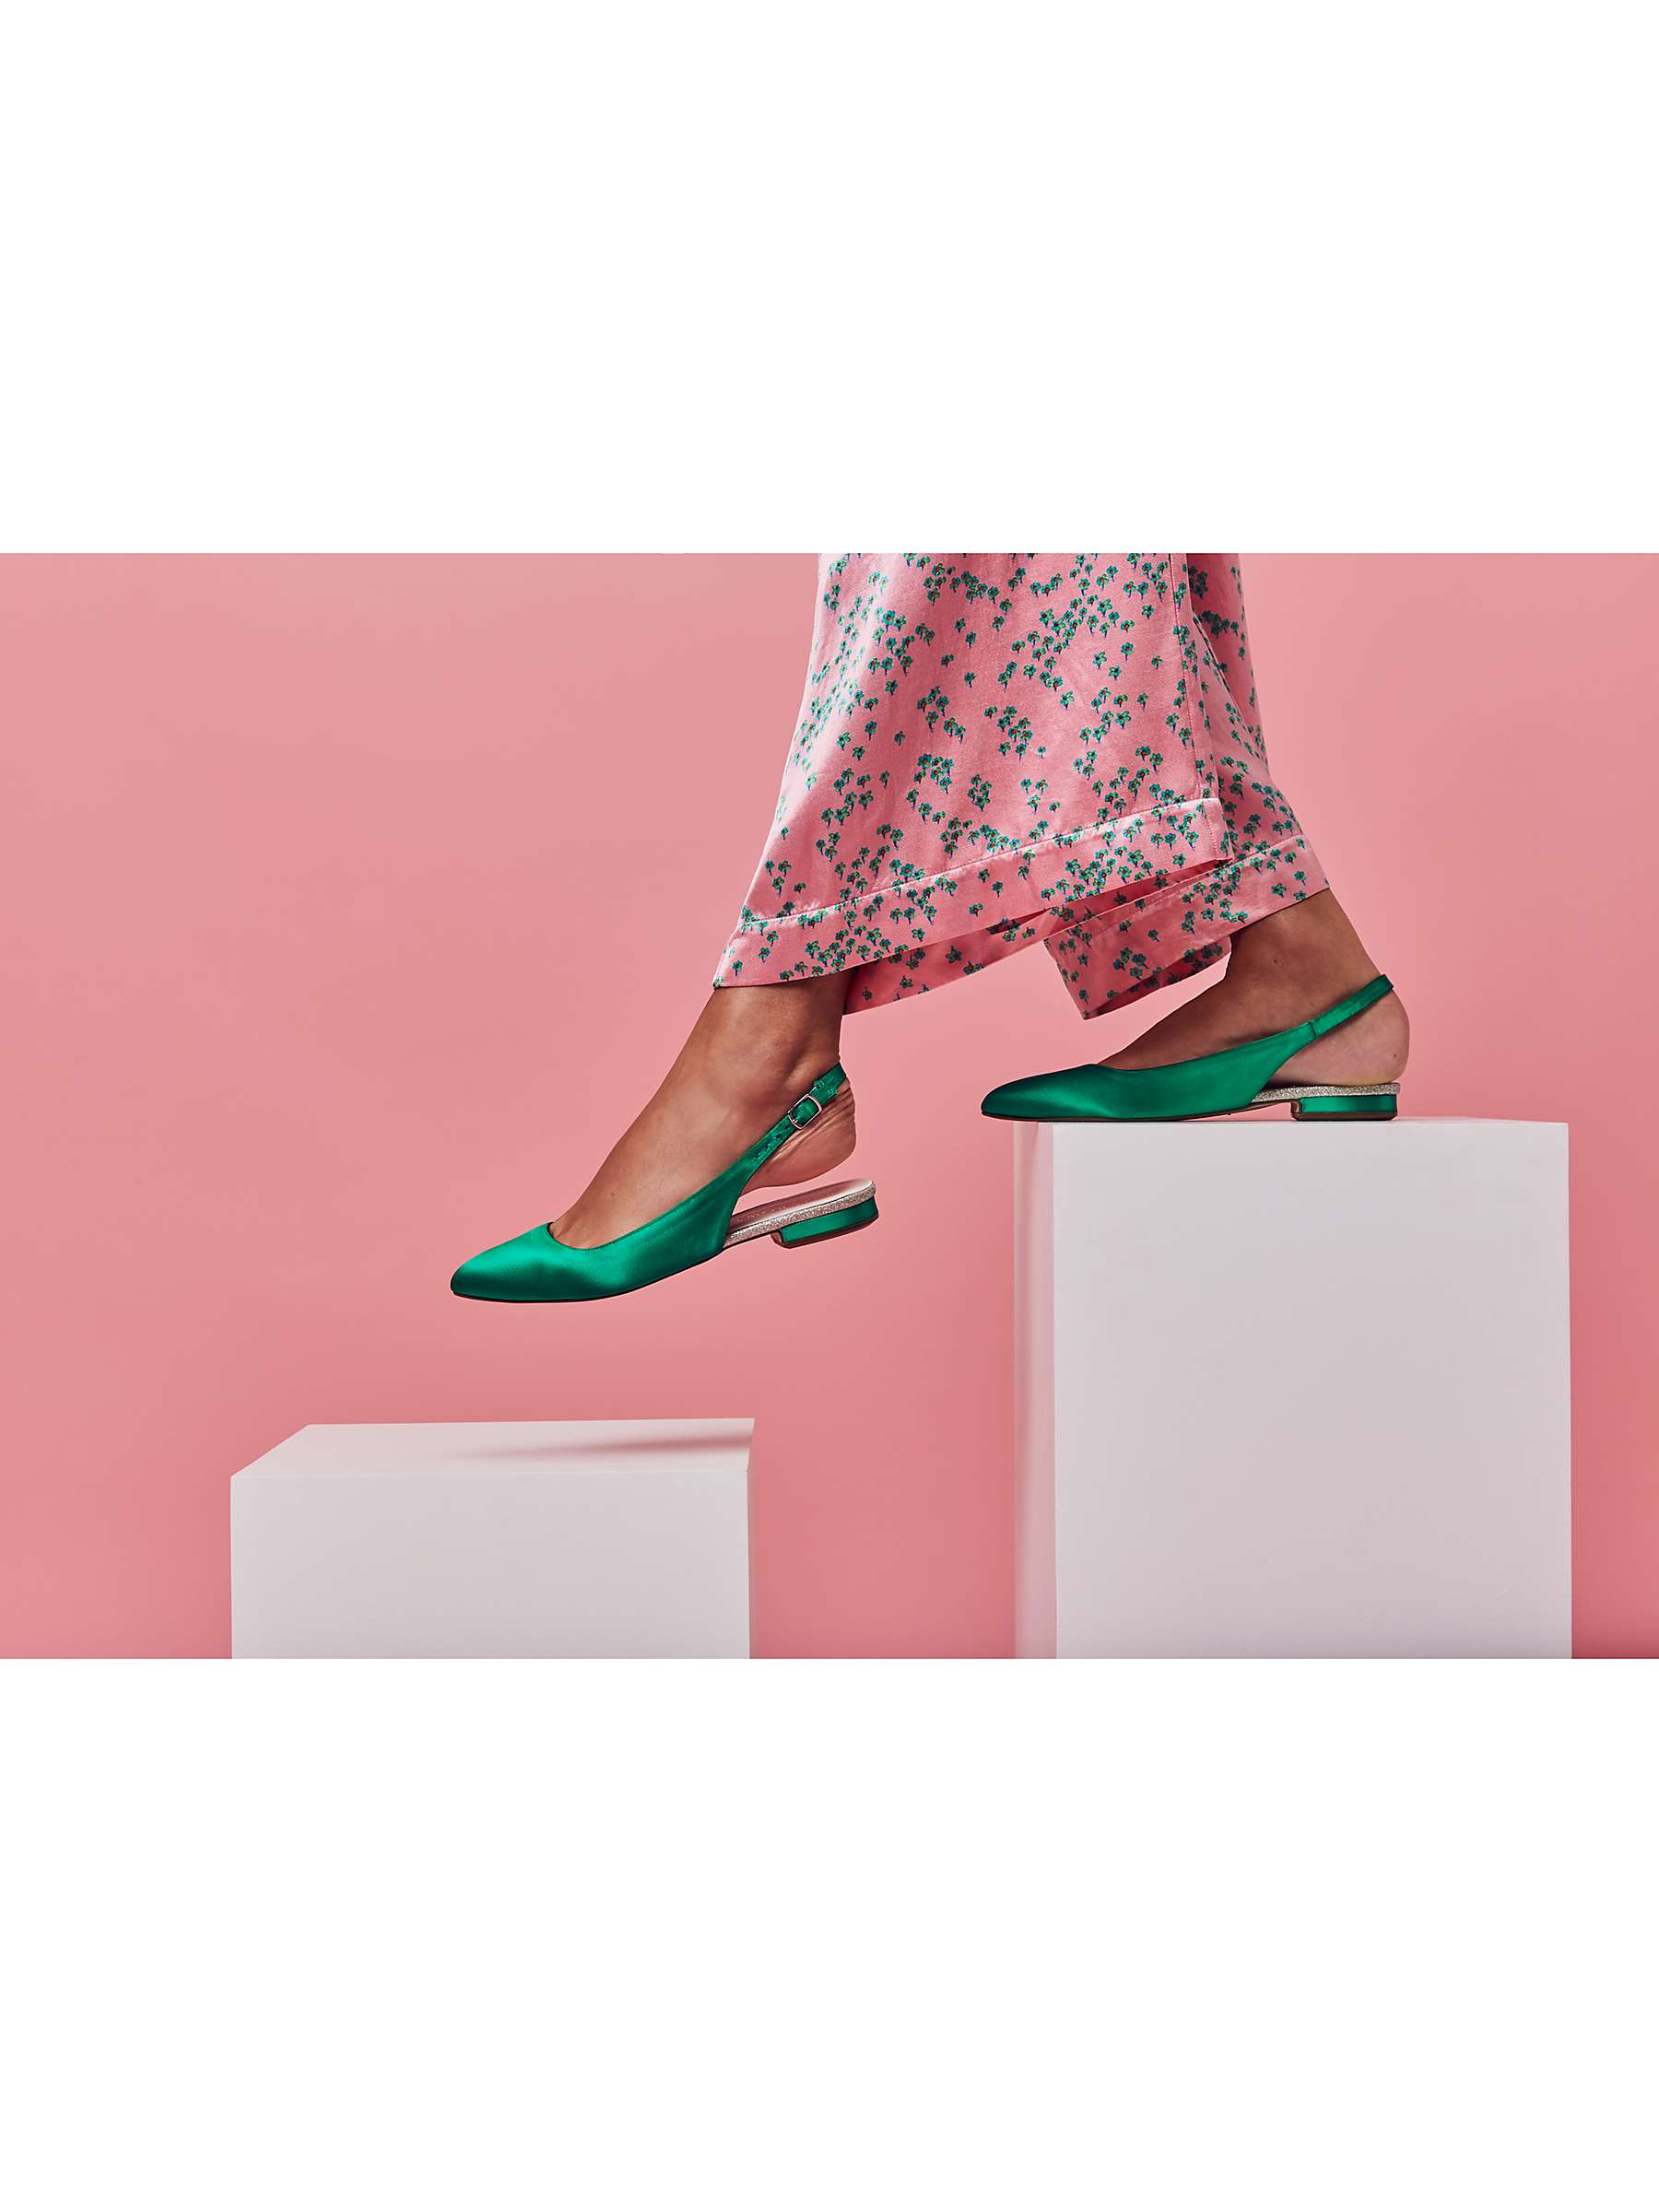 Buy Rainbow Club Women's Shoes Direct Dye Pack Online at johnlewis.com